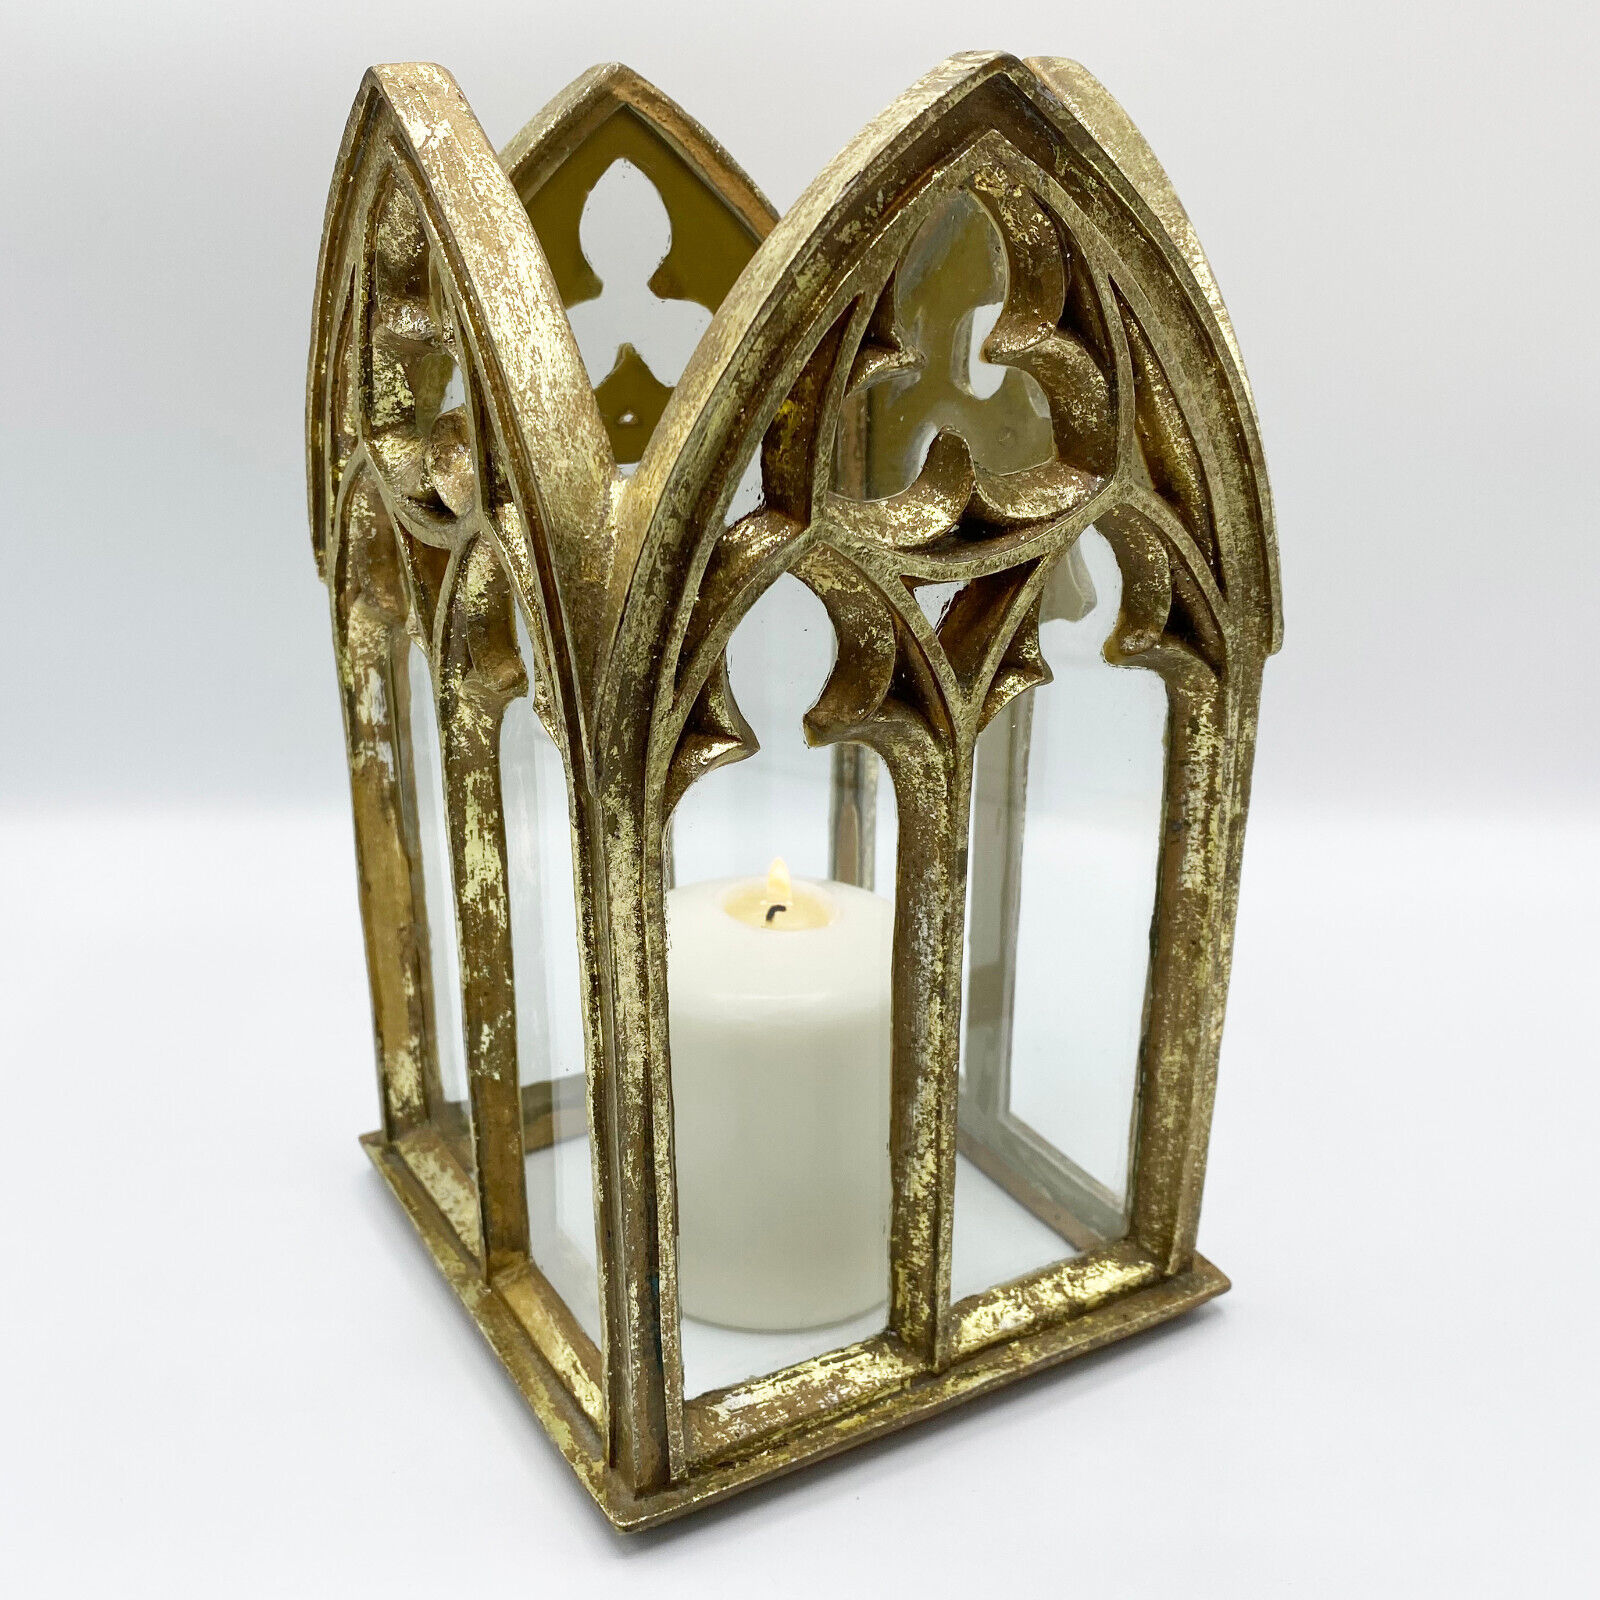 Gothic Inspired Arched Windows Decorative Candle Cover or Potted Plant Screen